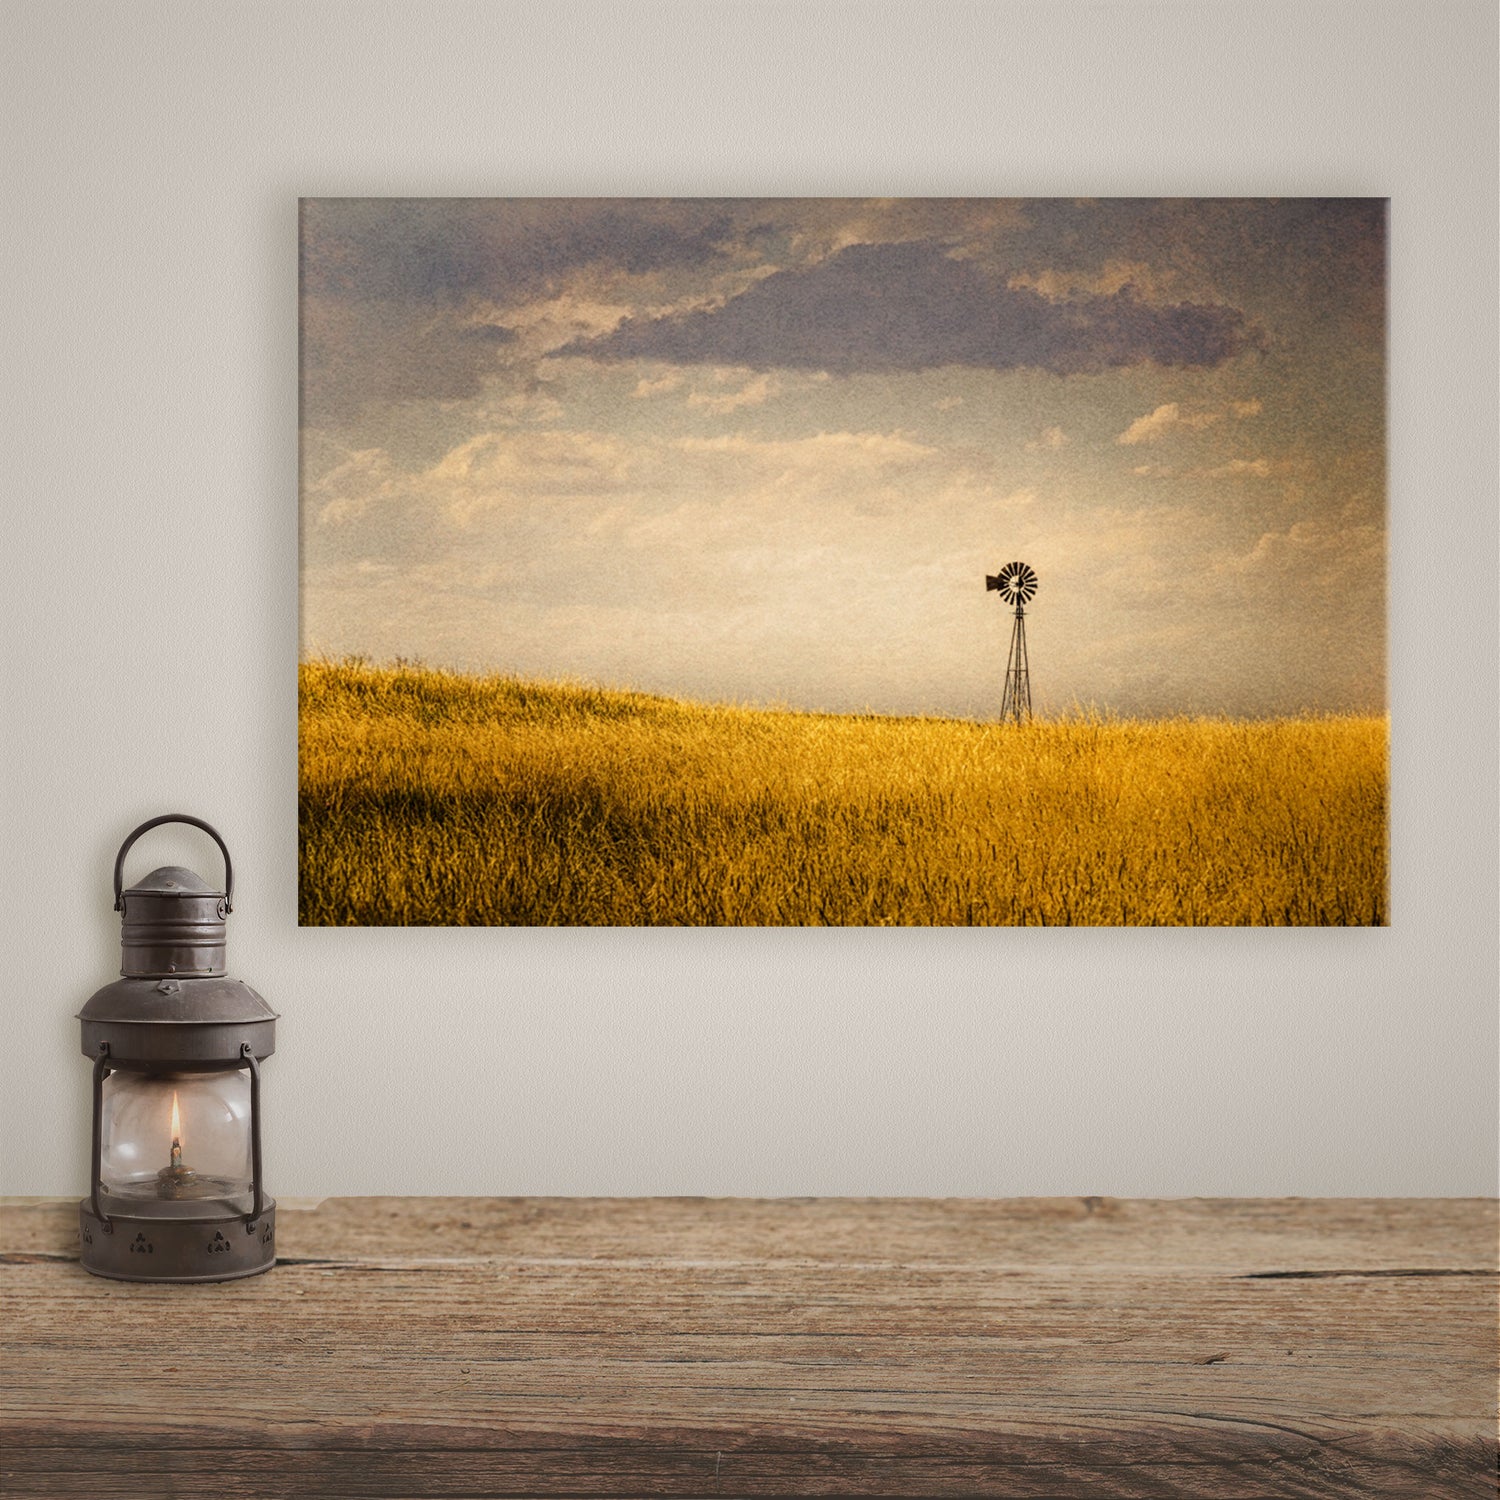 The iconic silhouette of a windmill, captured on this canvas, brings a sense of Western nostalgia and the expansive freedom of Nebraska’s plains into your living space.